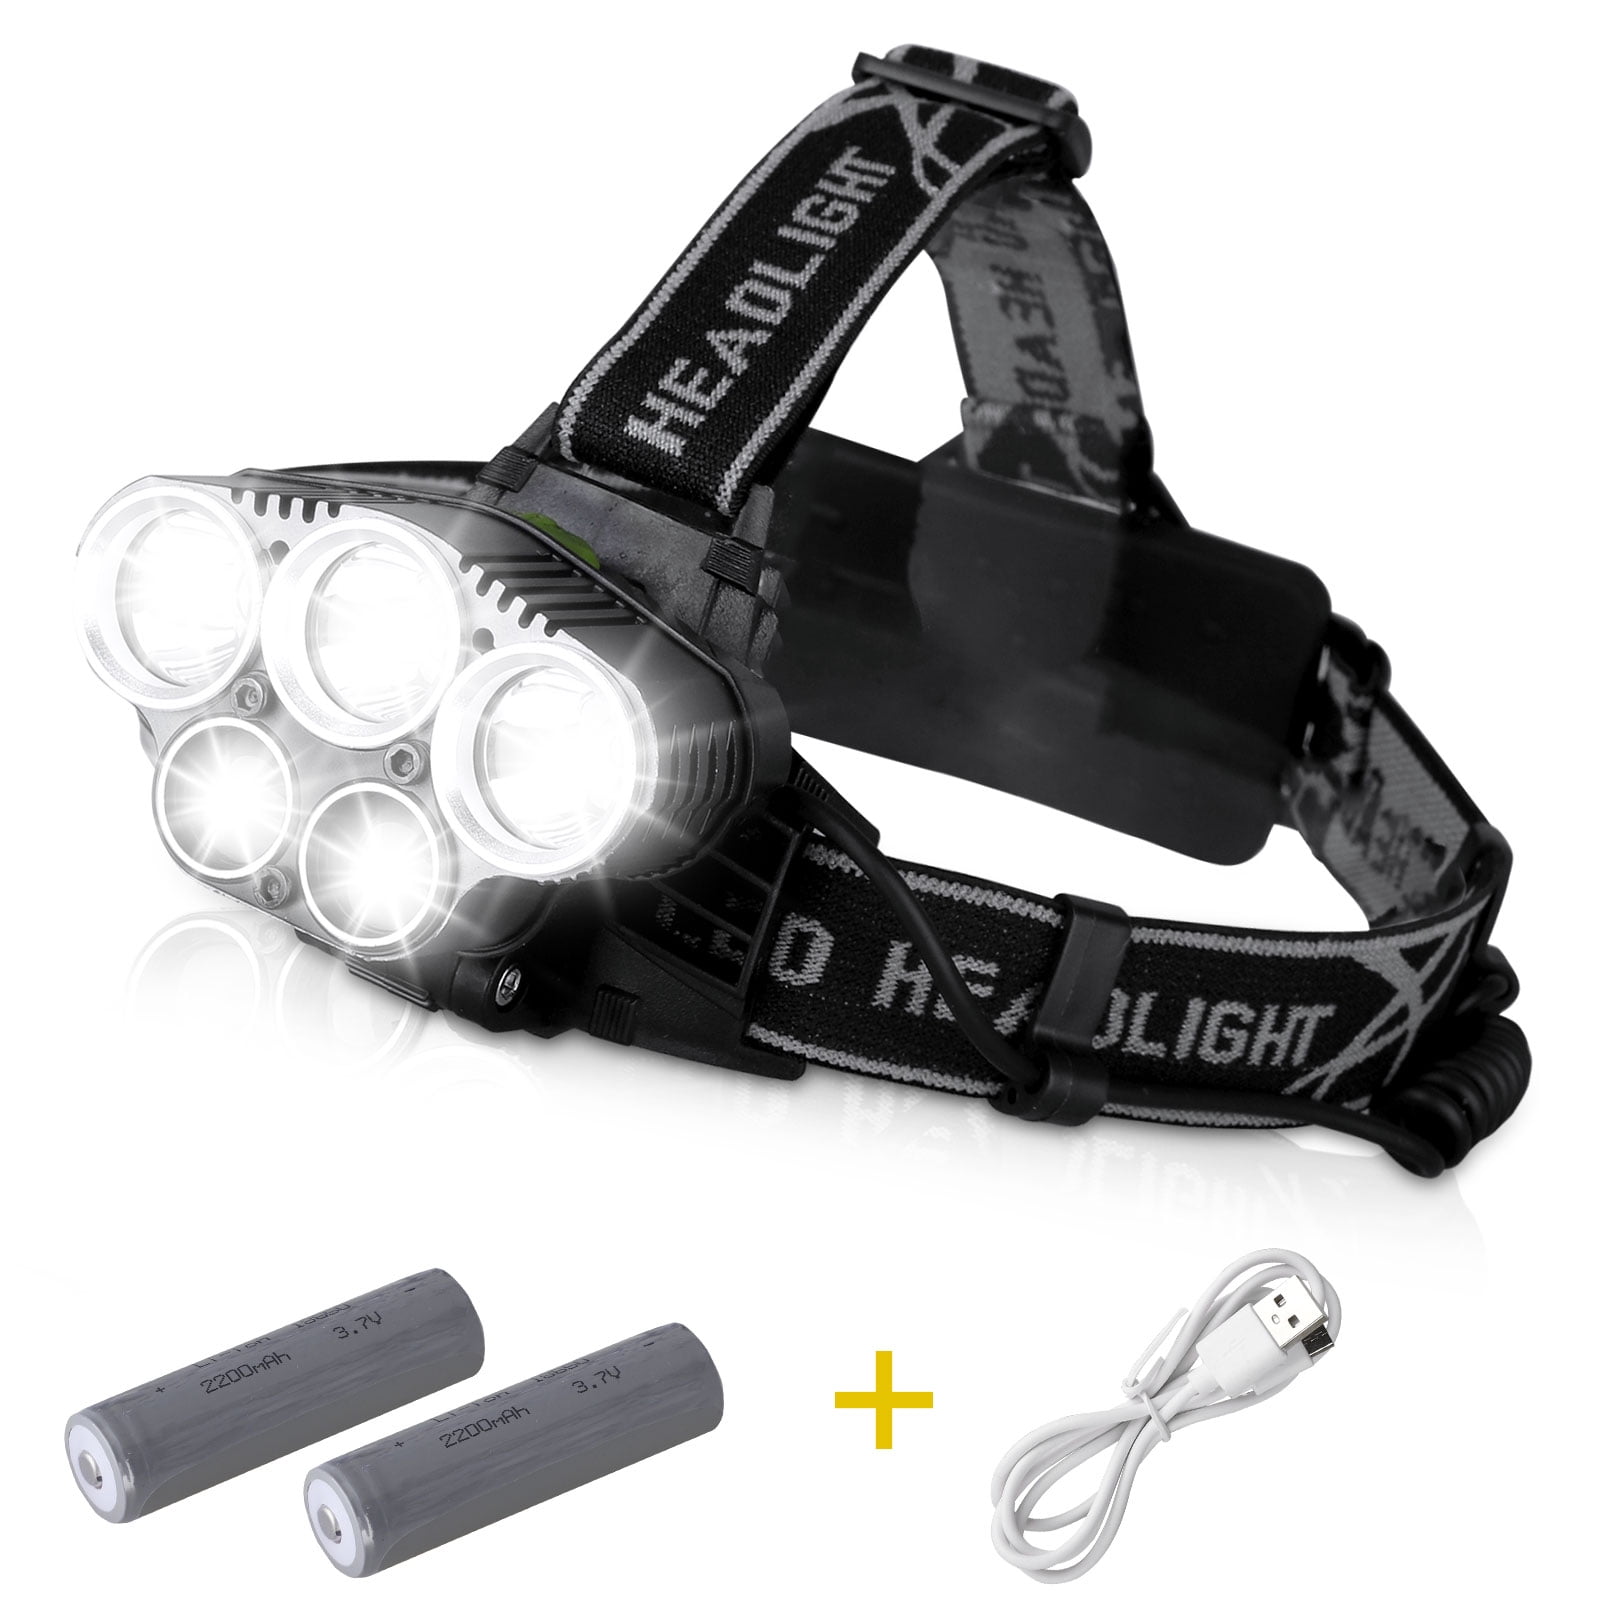 TSV T6 LED Beads 80000 Lumens Headlamp 5 Working Modes with Rechargeable Batteries, IP67 Waterproof Head Light, USB Charging Cable for Camping, Hiking, Reading, Bike, Hunting &amp; Fishing Lighting